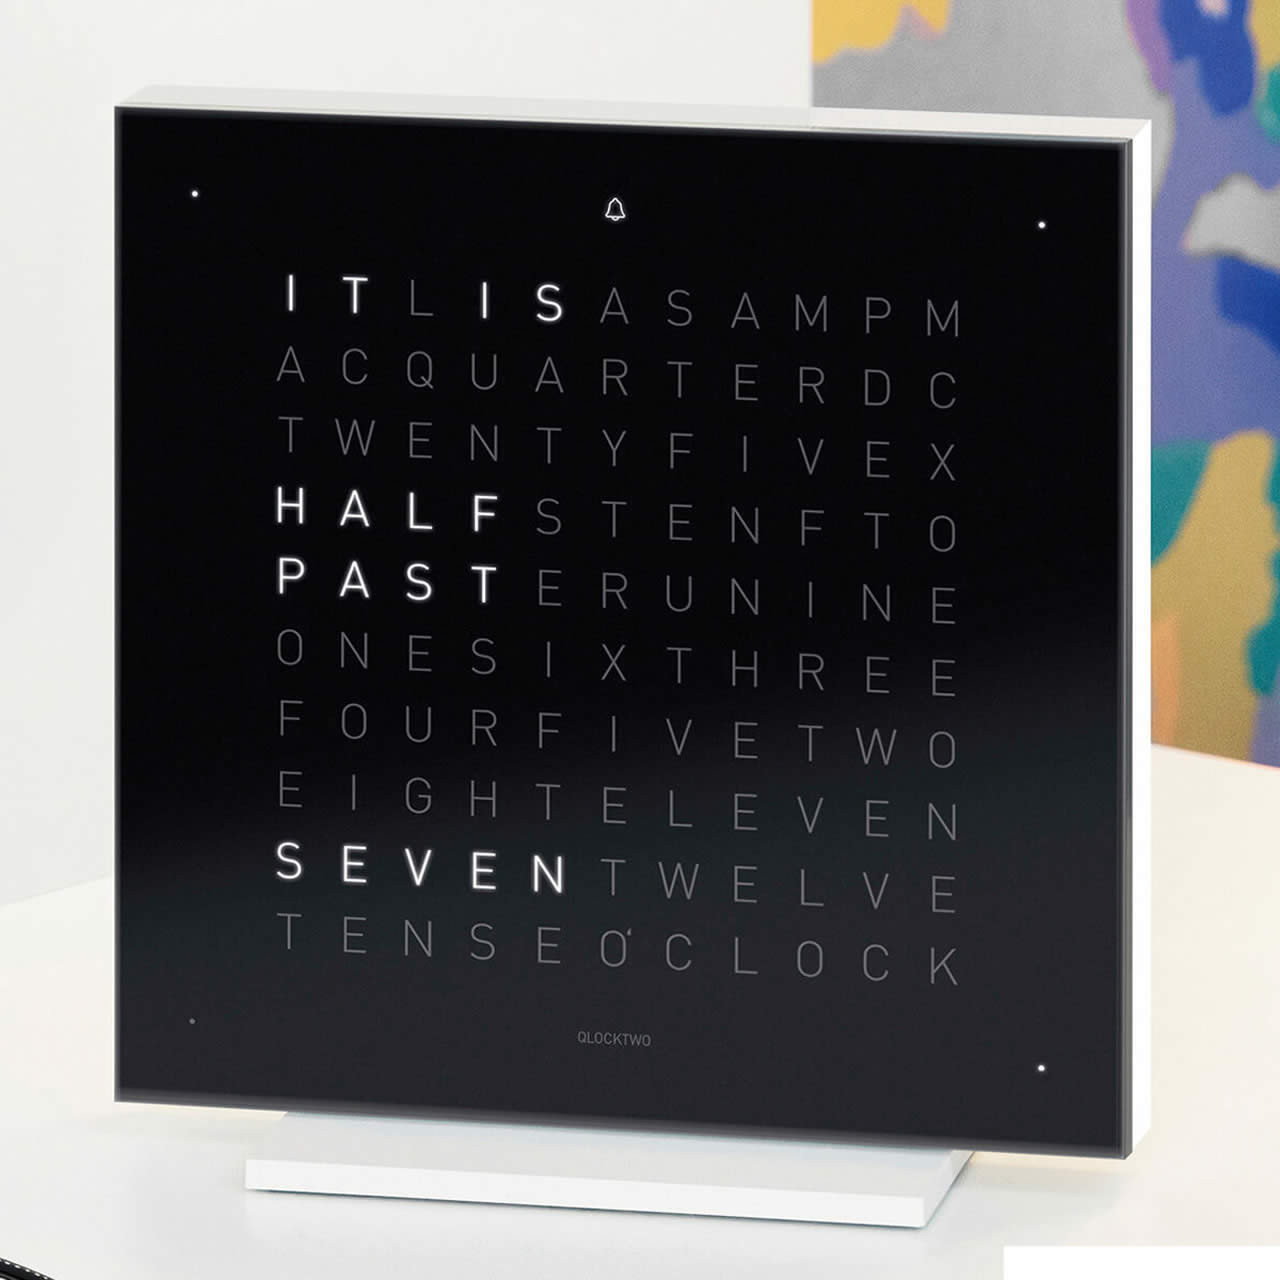 QLOCKTWO TOUCH Modern Acrylic Table Clock Red, Green, Blue, White